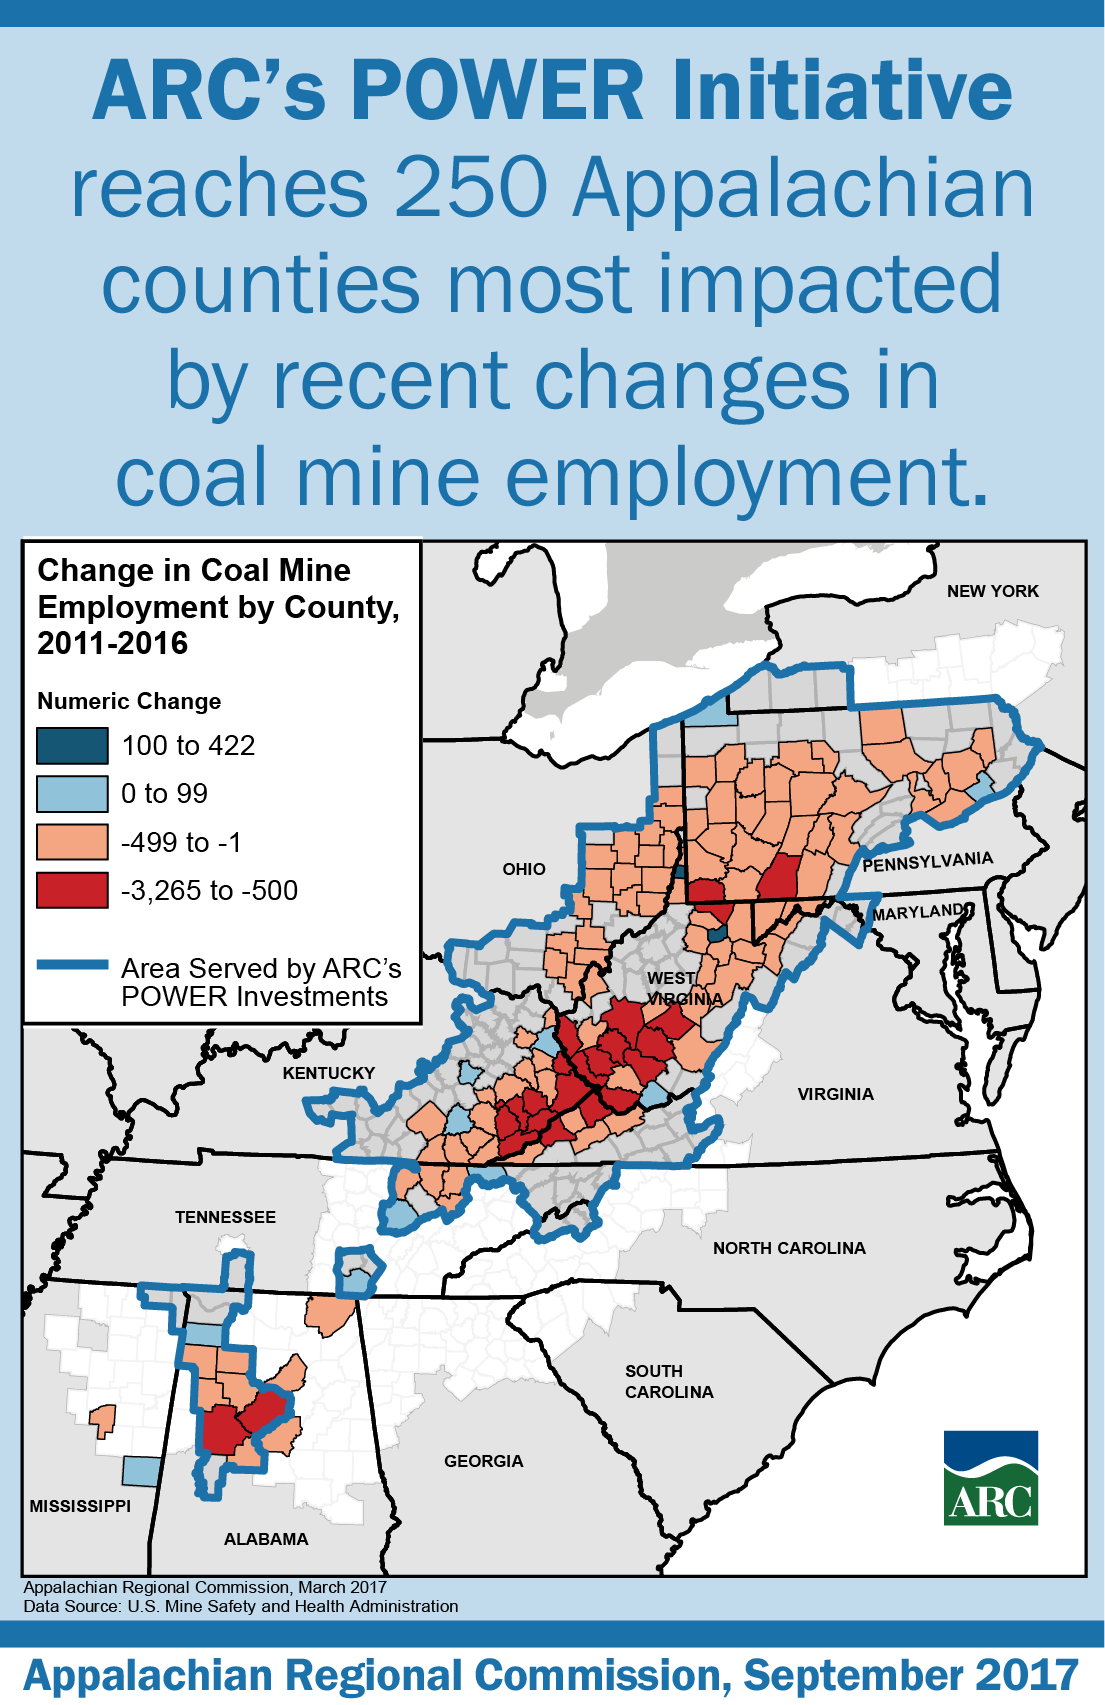 Infographic: Through the POWER Initiative, ARC has invested $94 million in projects to diversify and grow the economies in 250 coal-impacted counties across Appalachia.